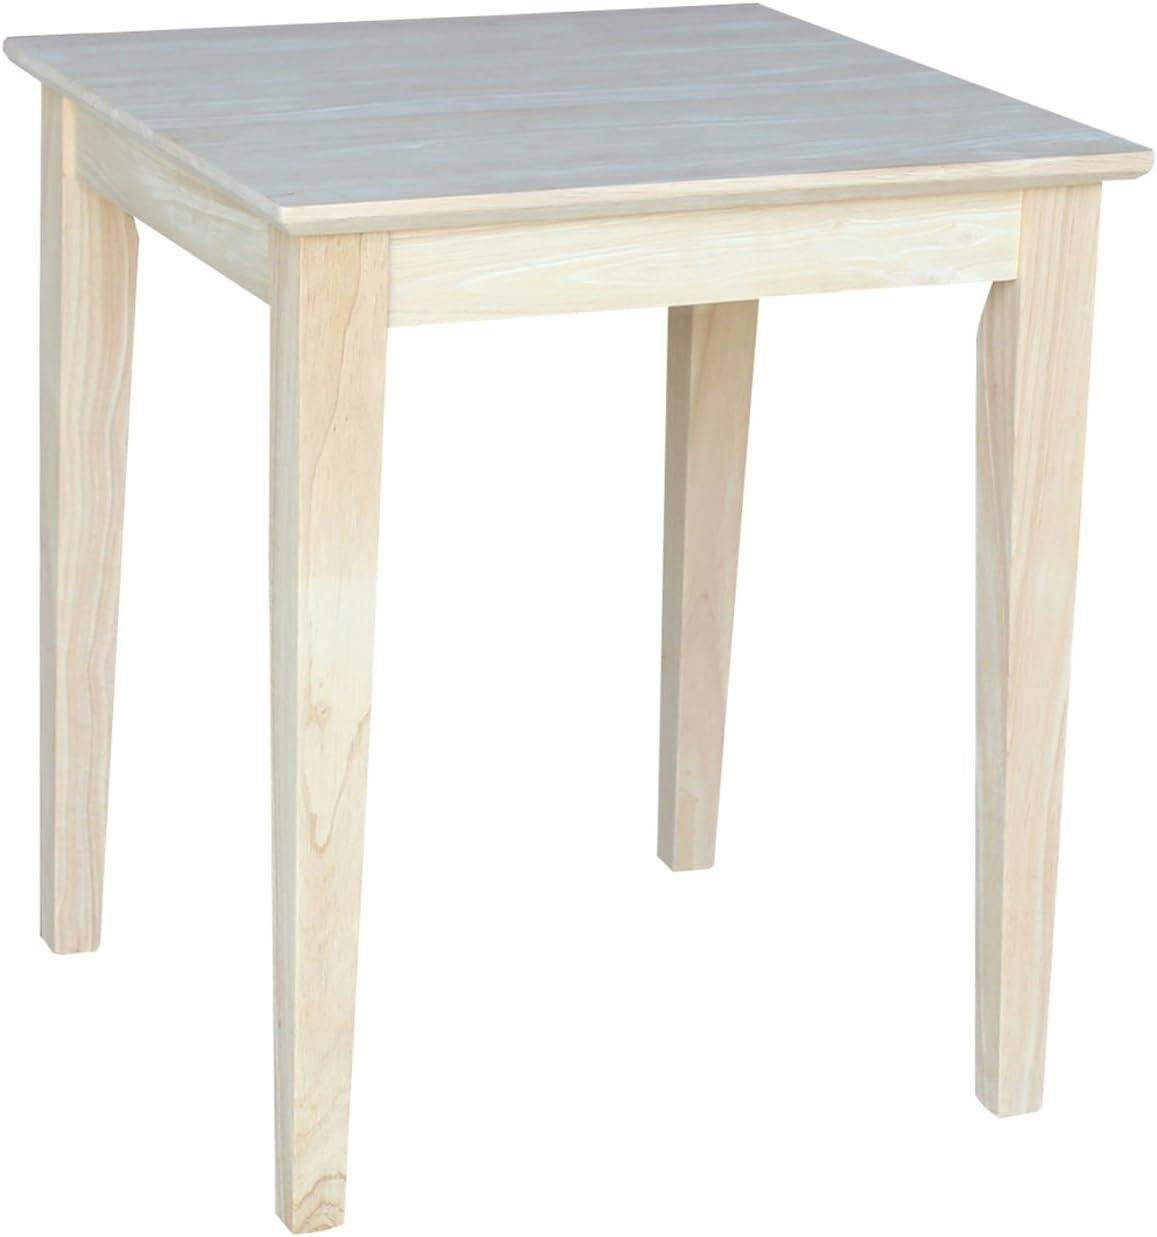 Shaker Style Tall Square Wood End Table in Natural Finish